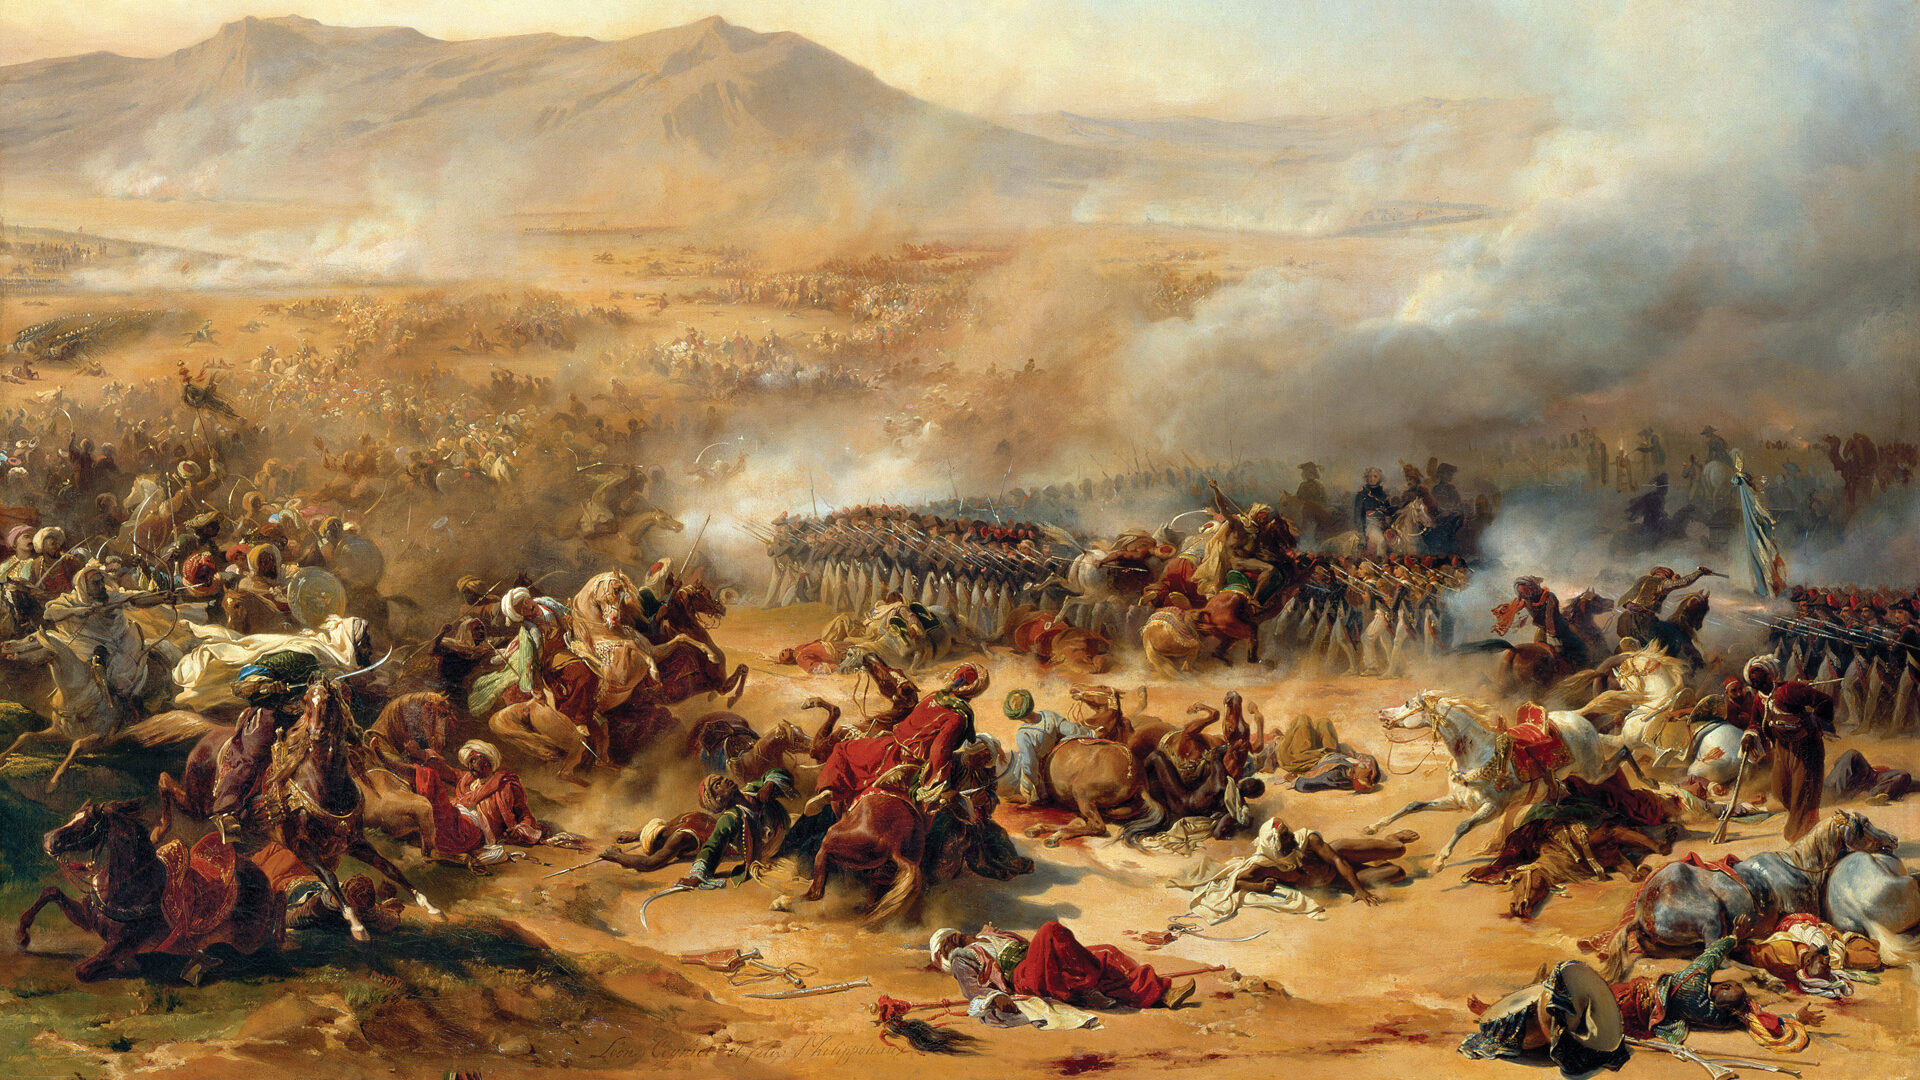 General Jean Baptiste Kleber’s French infantry form squares to defend against superior numbers of mounted Mamelukes on April 16, 1799. Kleber’s night raid on Jazzar Pasha’s camp at the base of Mount Tabor backfired when he failed to estimate how long it would take to reach the camp, and his approach was discovered at dawn.